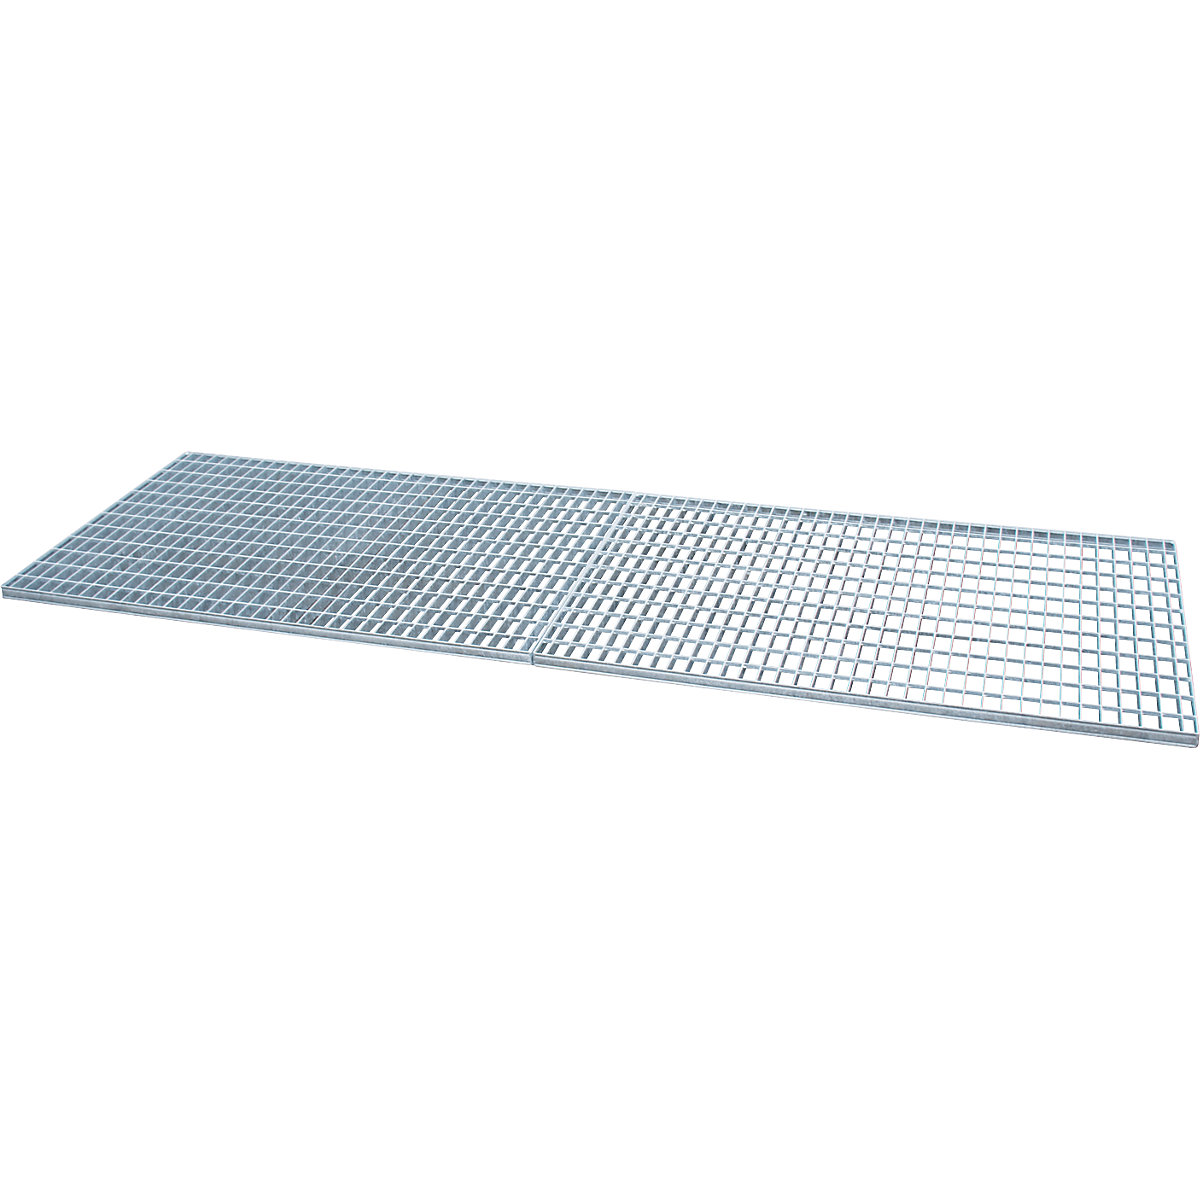 Grate – eurokraft pro, for sump trays for 200 l drums, zinc plated, LxWxH 2400 x 800 x 250 mm-2